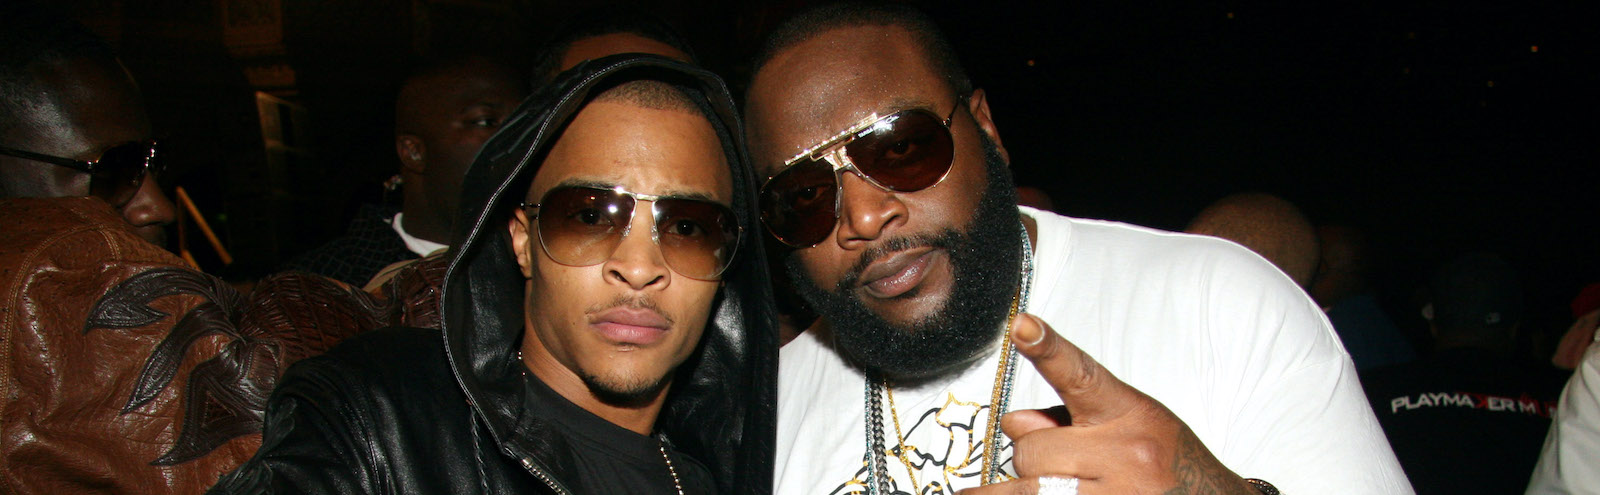 Rick Ross Says He Has ‘Unfinished Business’ With T.I. While Teasing A ‘Verzuz’ Battle With Him